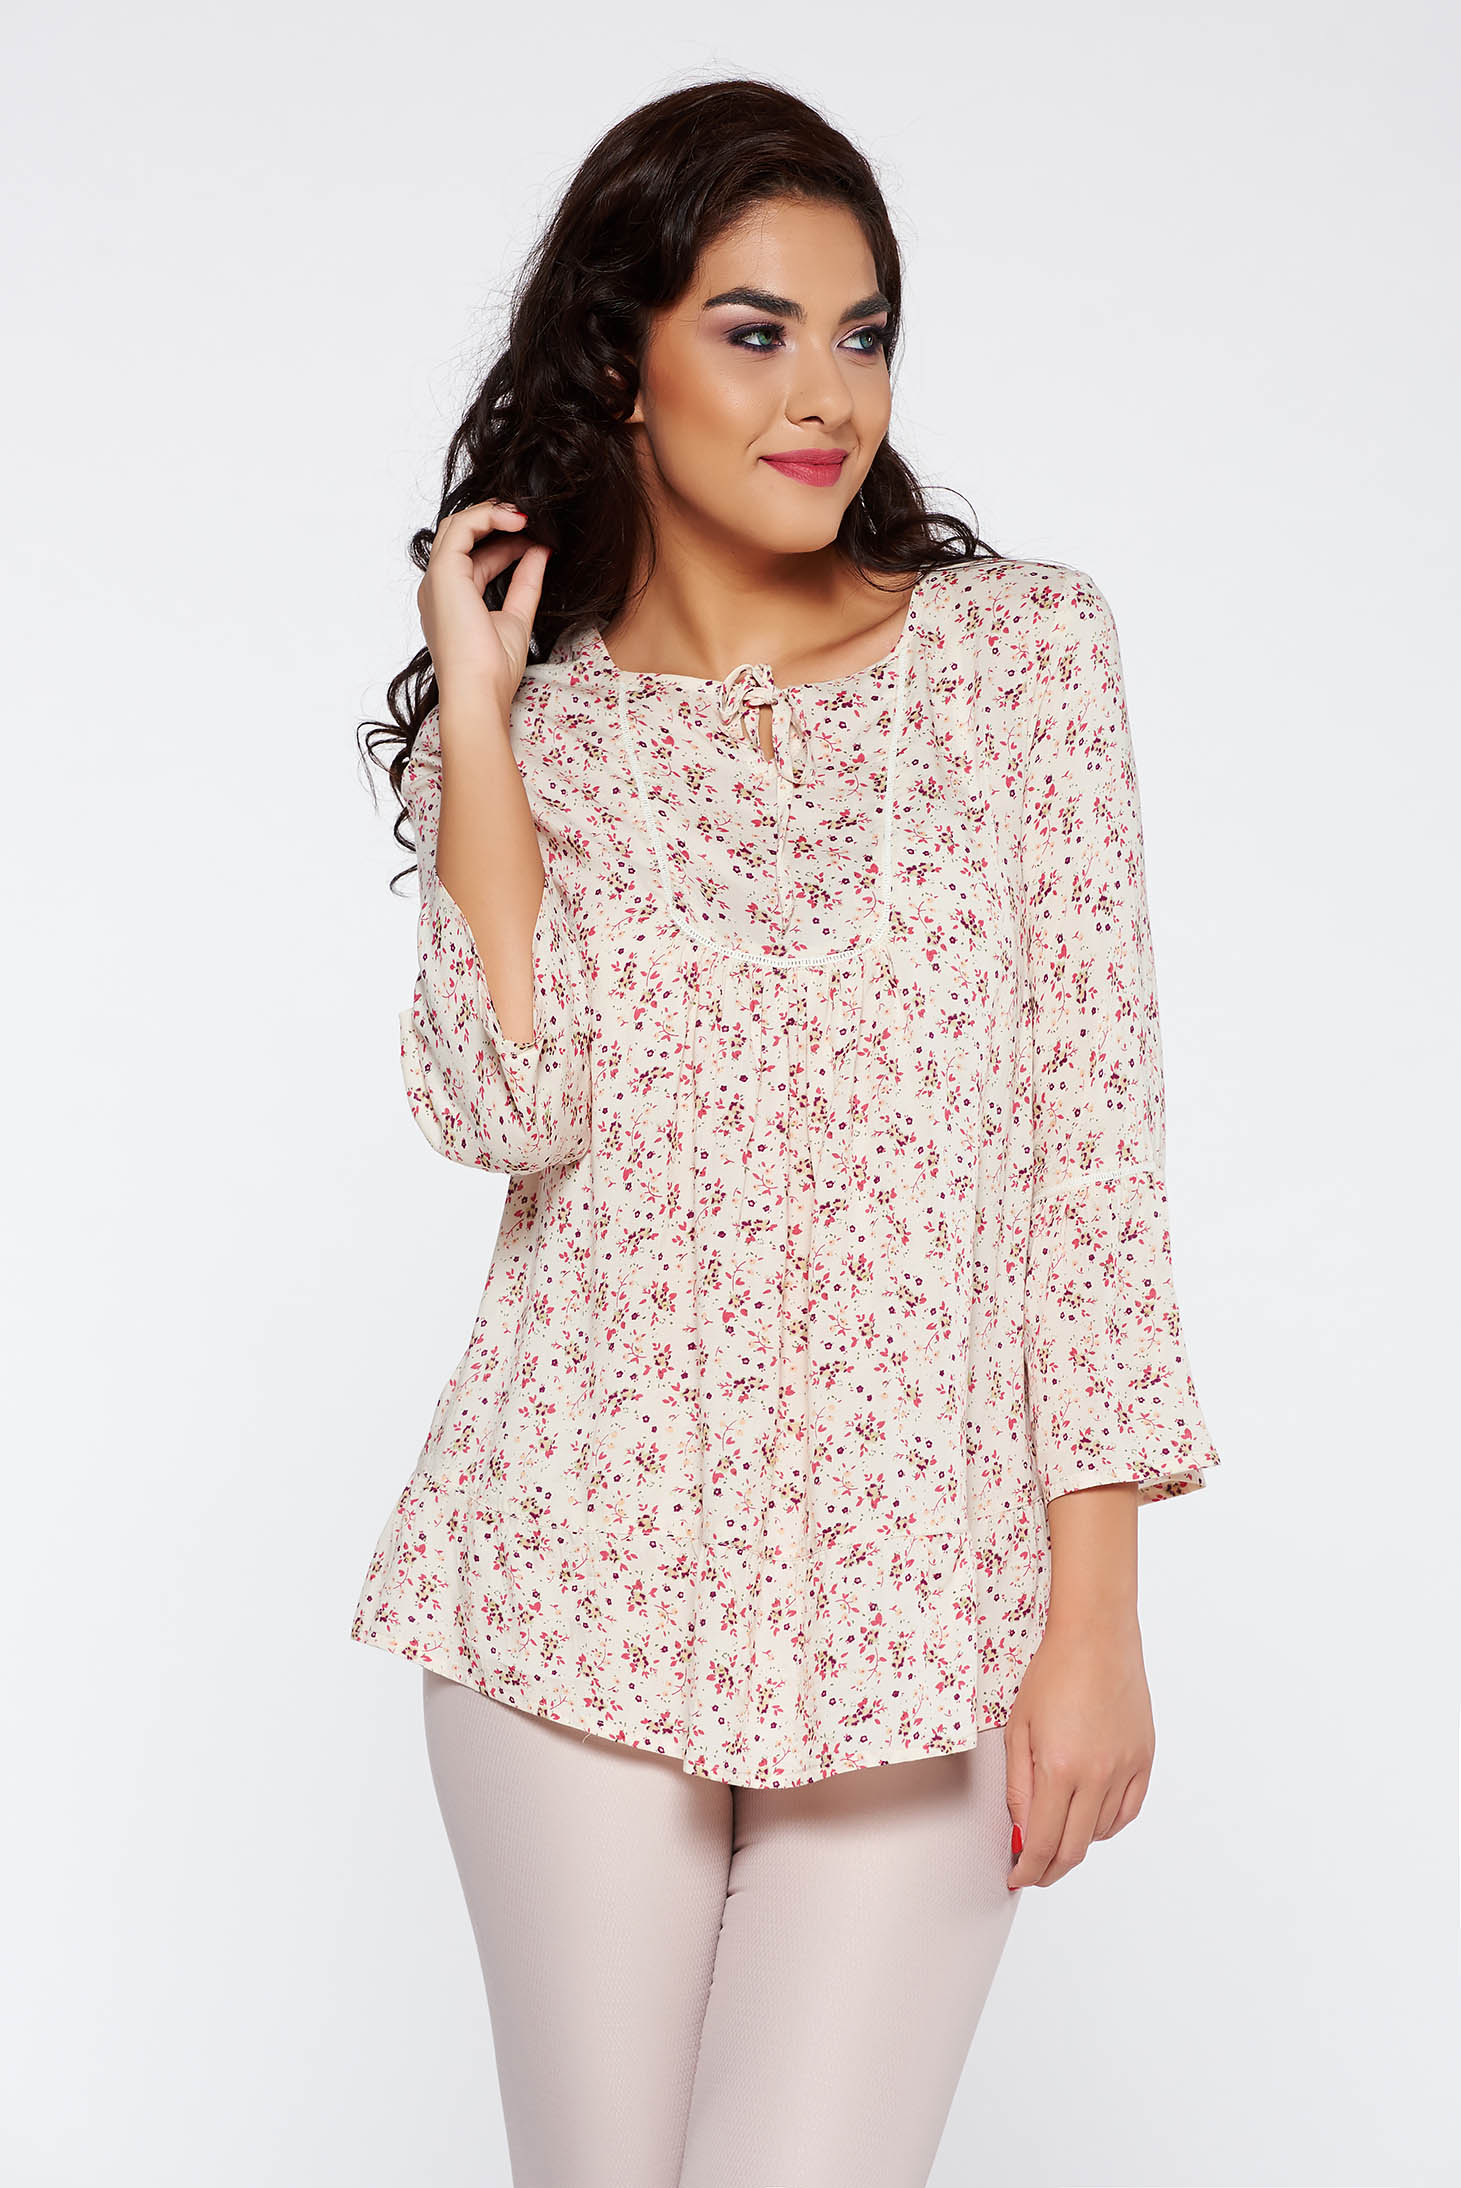 Casual 3/4 sleeve thin fabric flared with floral print rosa women`s blouse